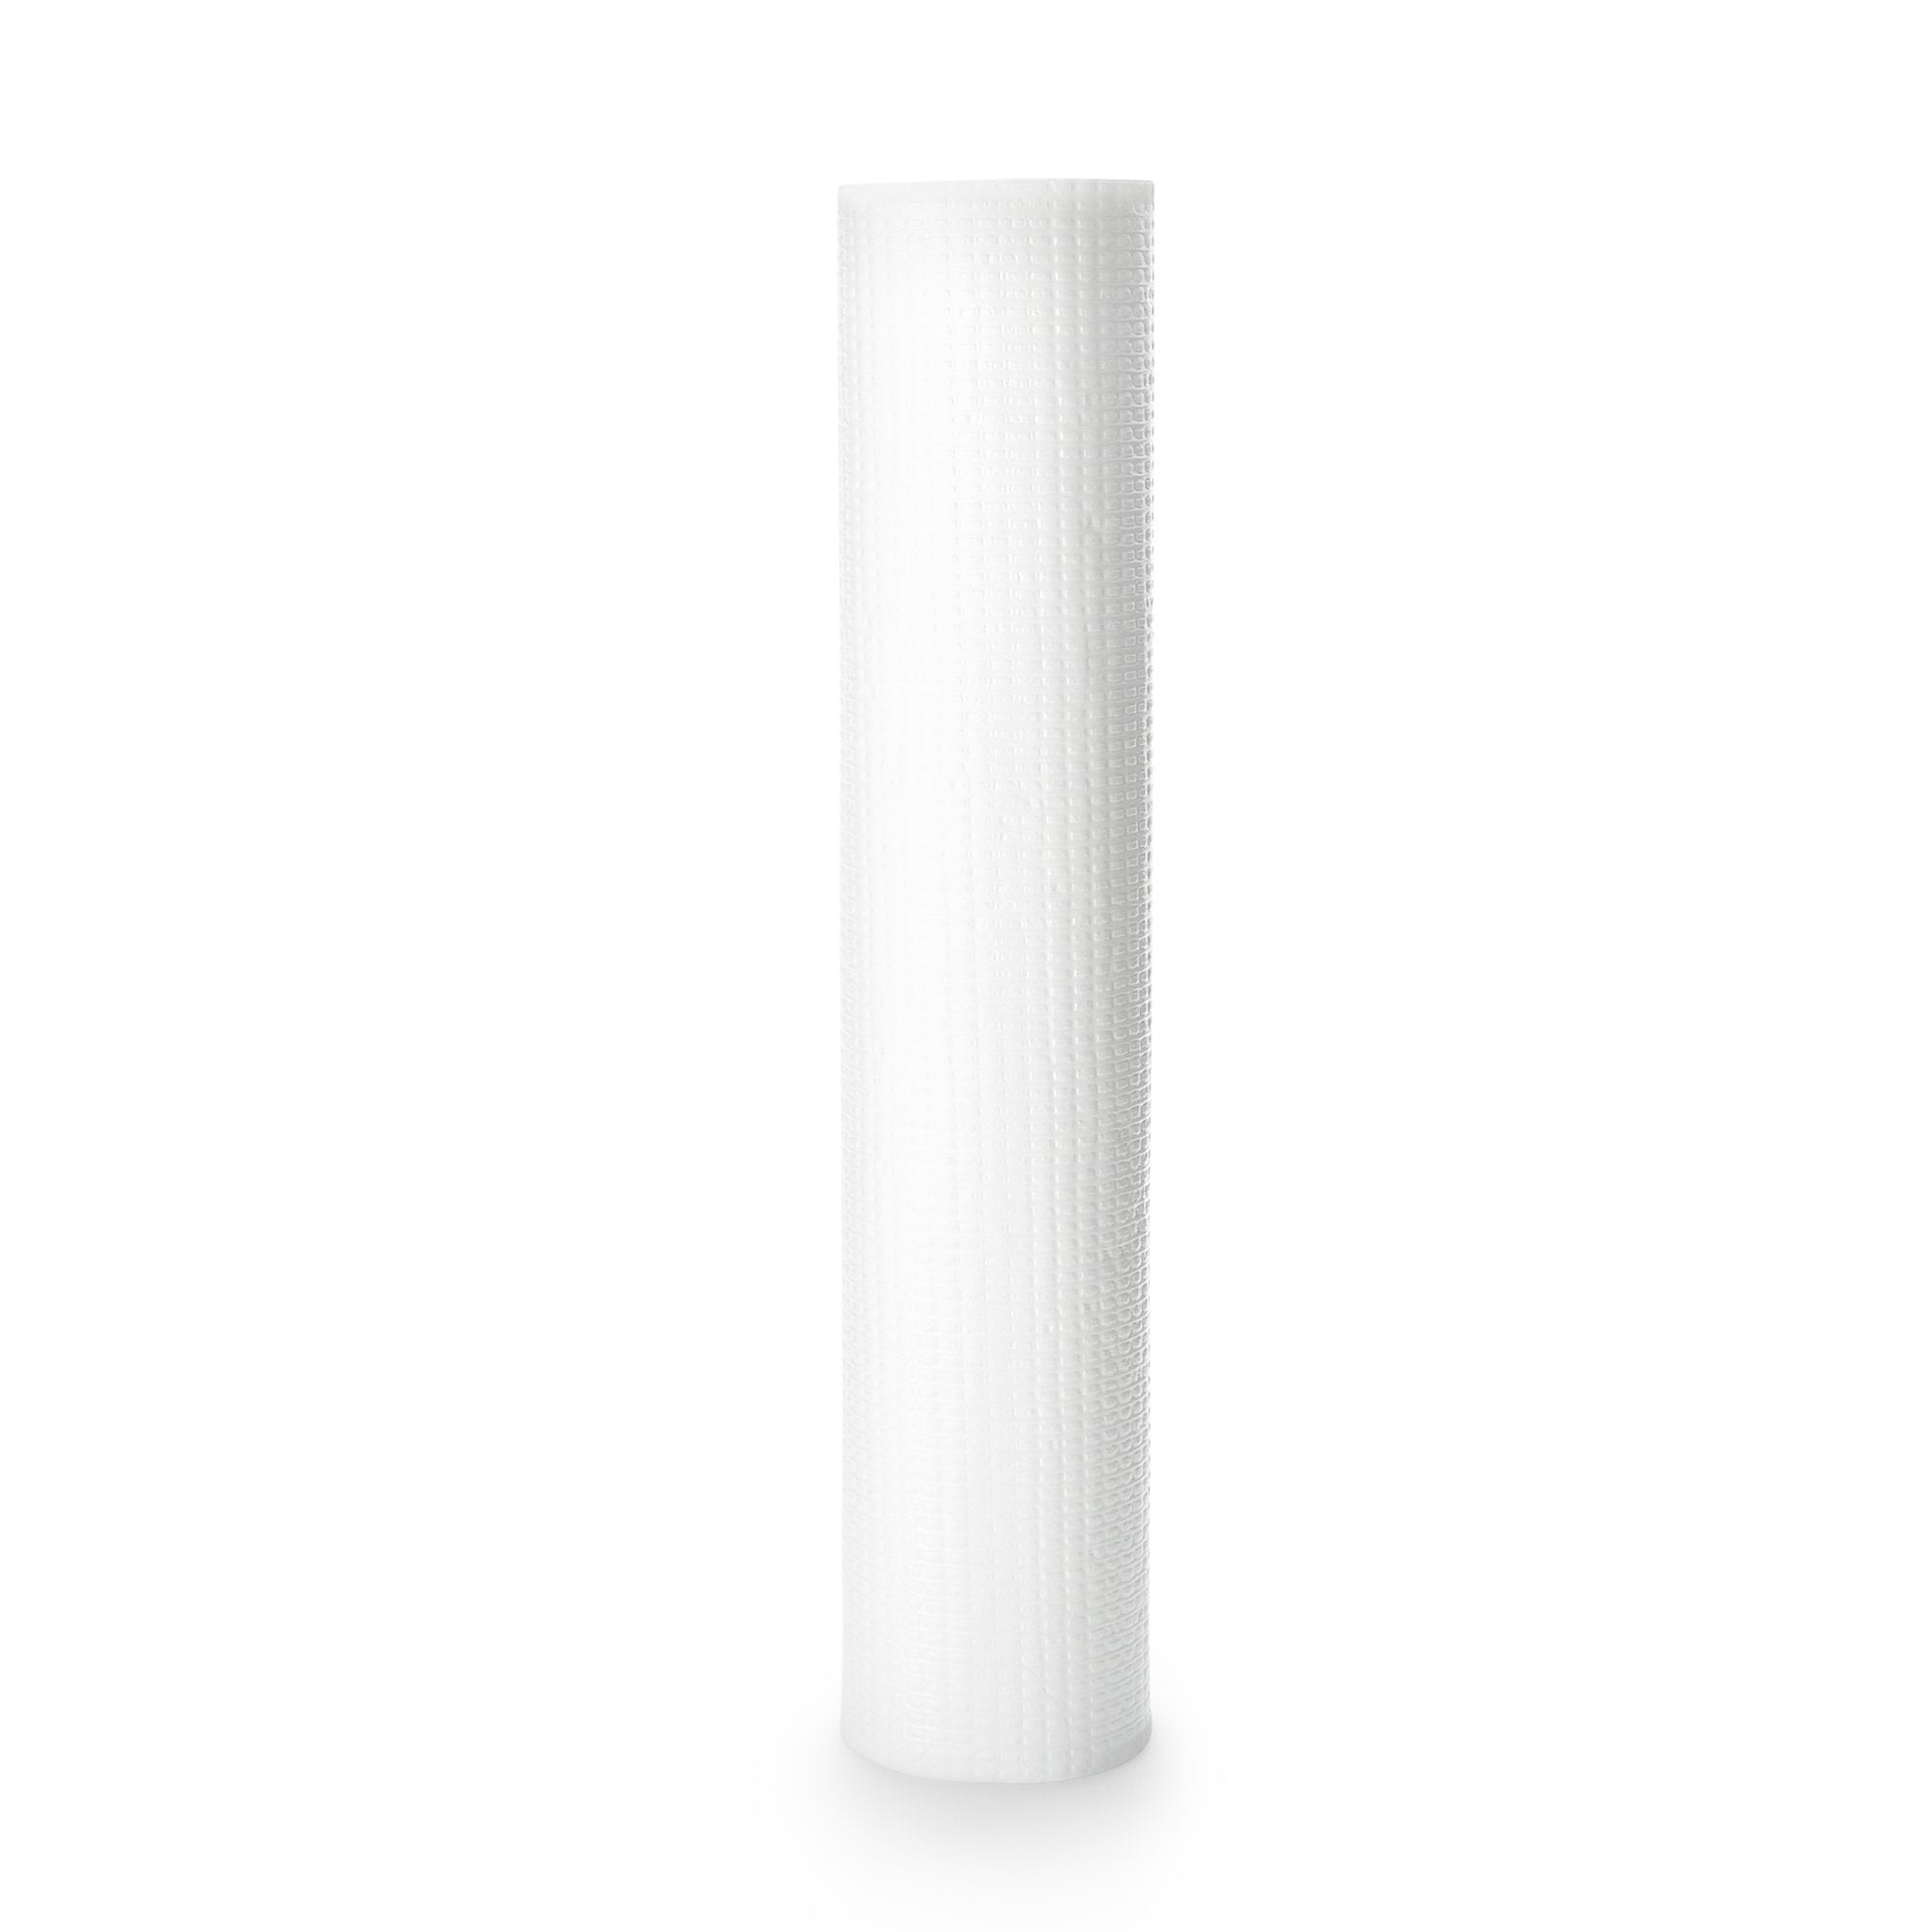 Table Paper McKesson 18 Inch Width White Textured